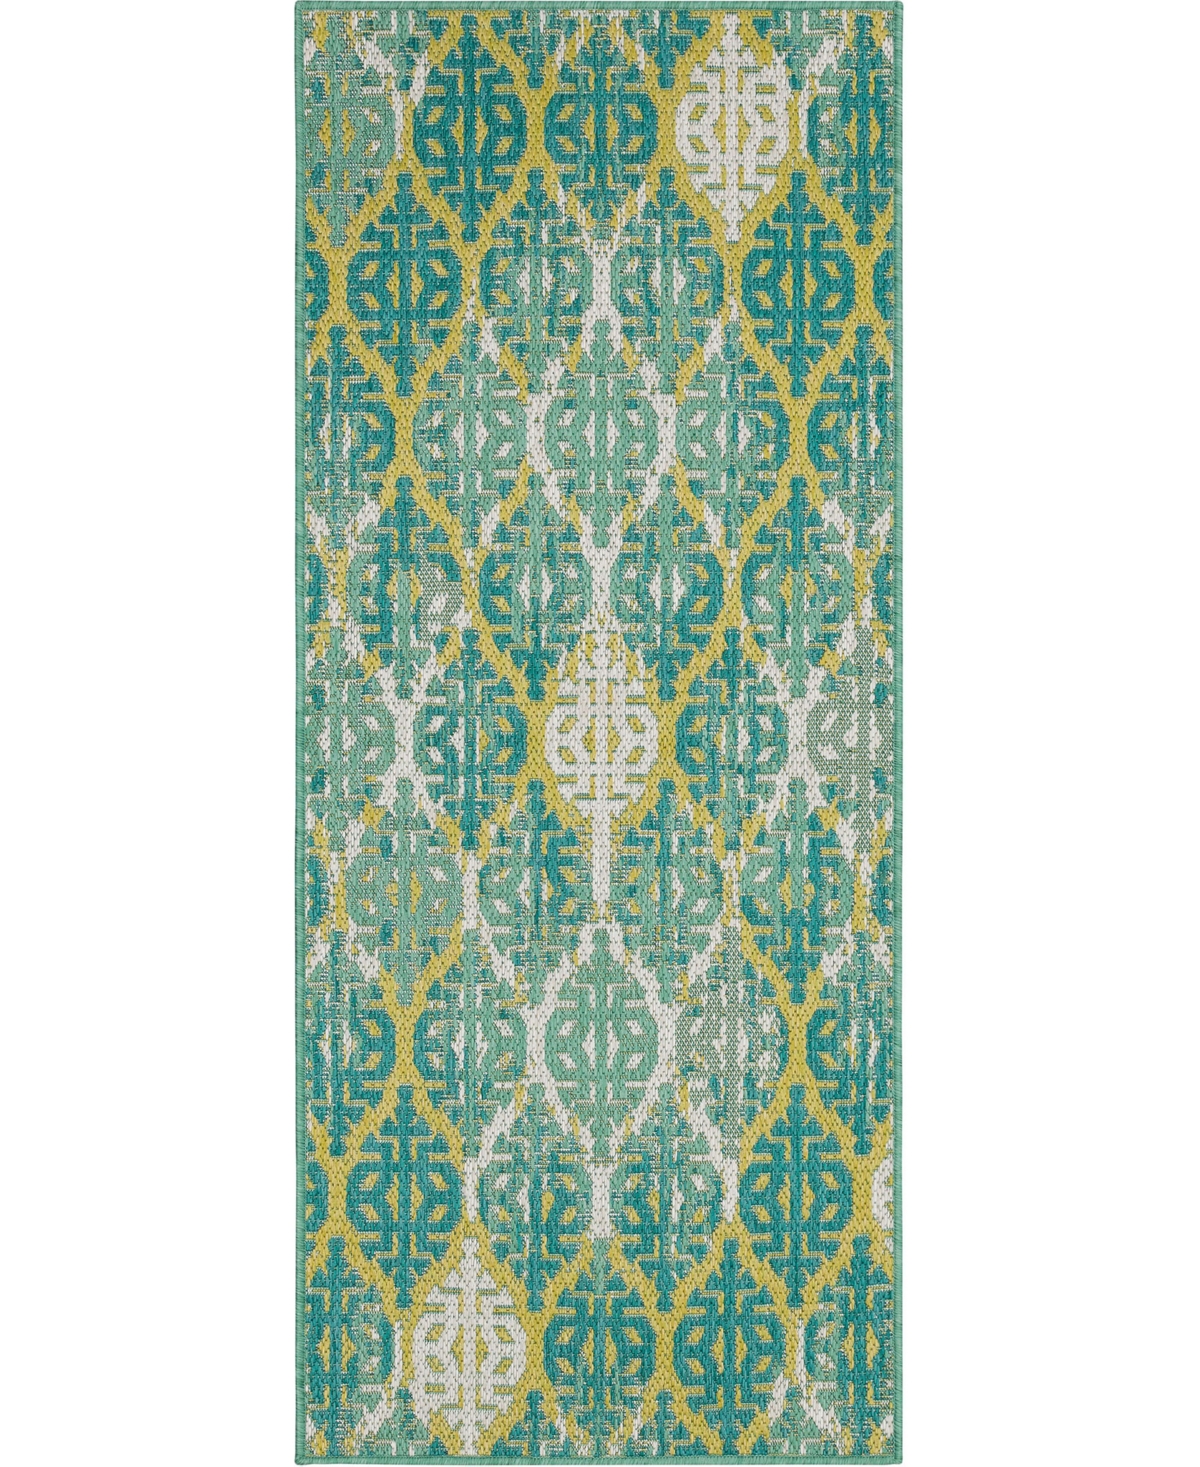 Mohawk Malibu Outdoor Stamped Ikat 2'5" X 6' Area Rug In Teal